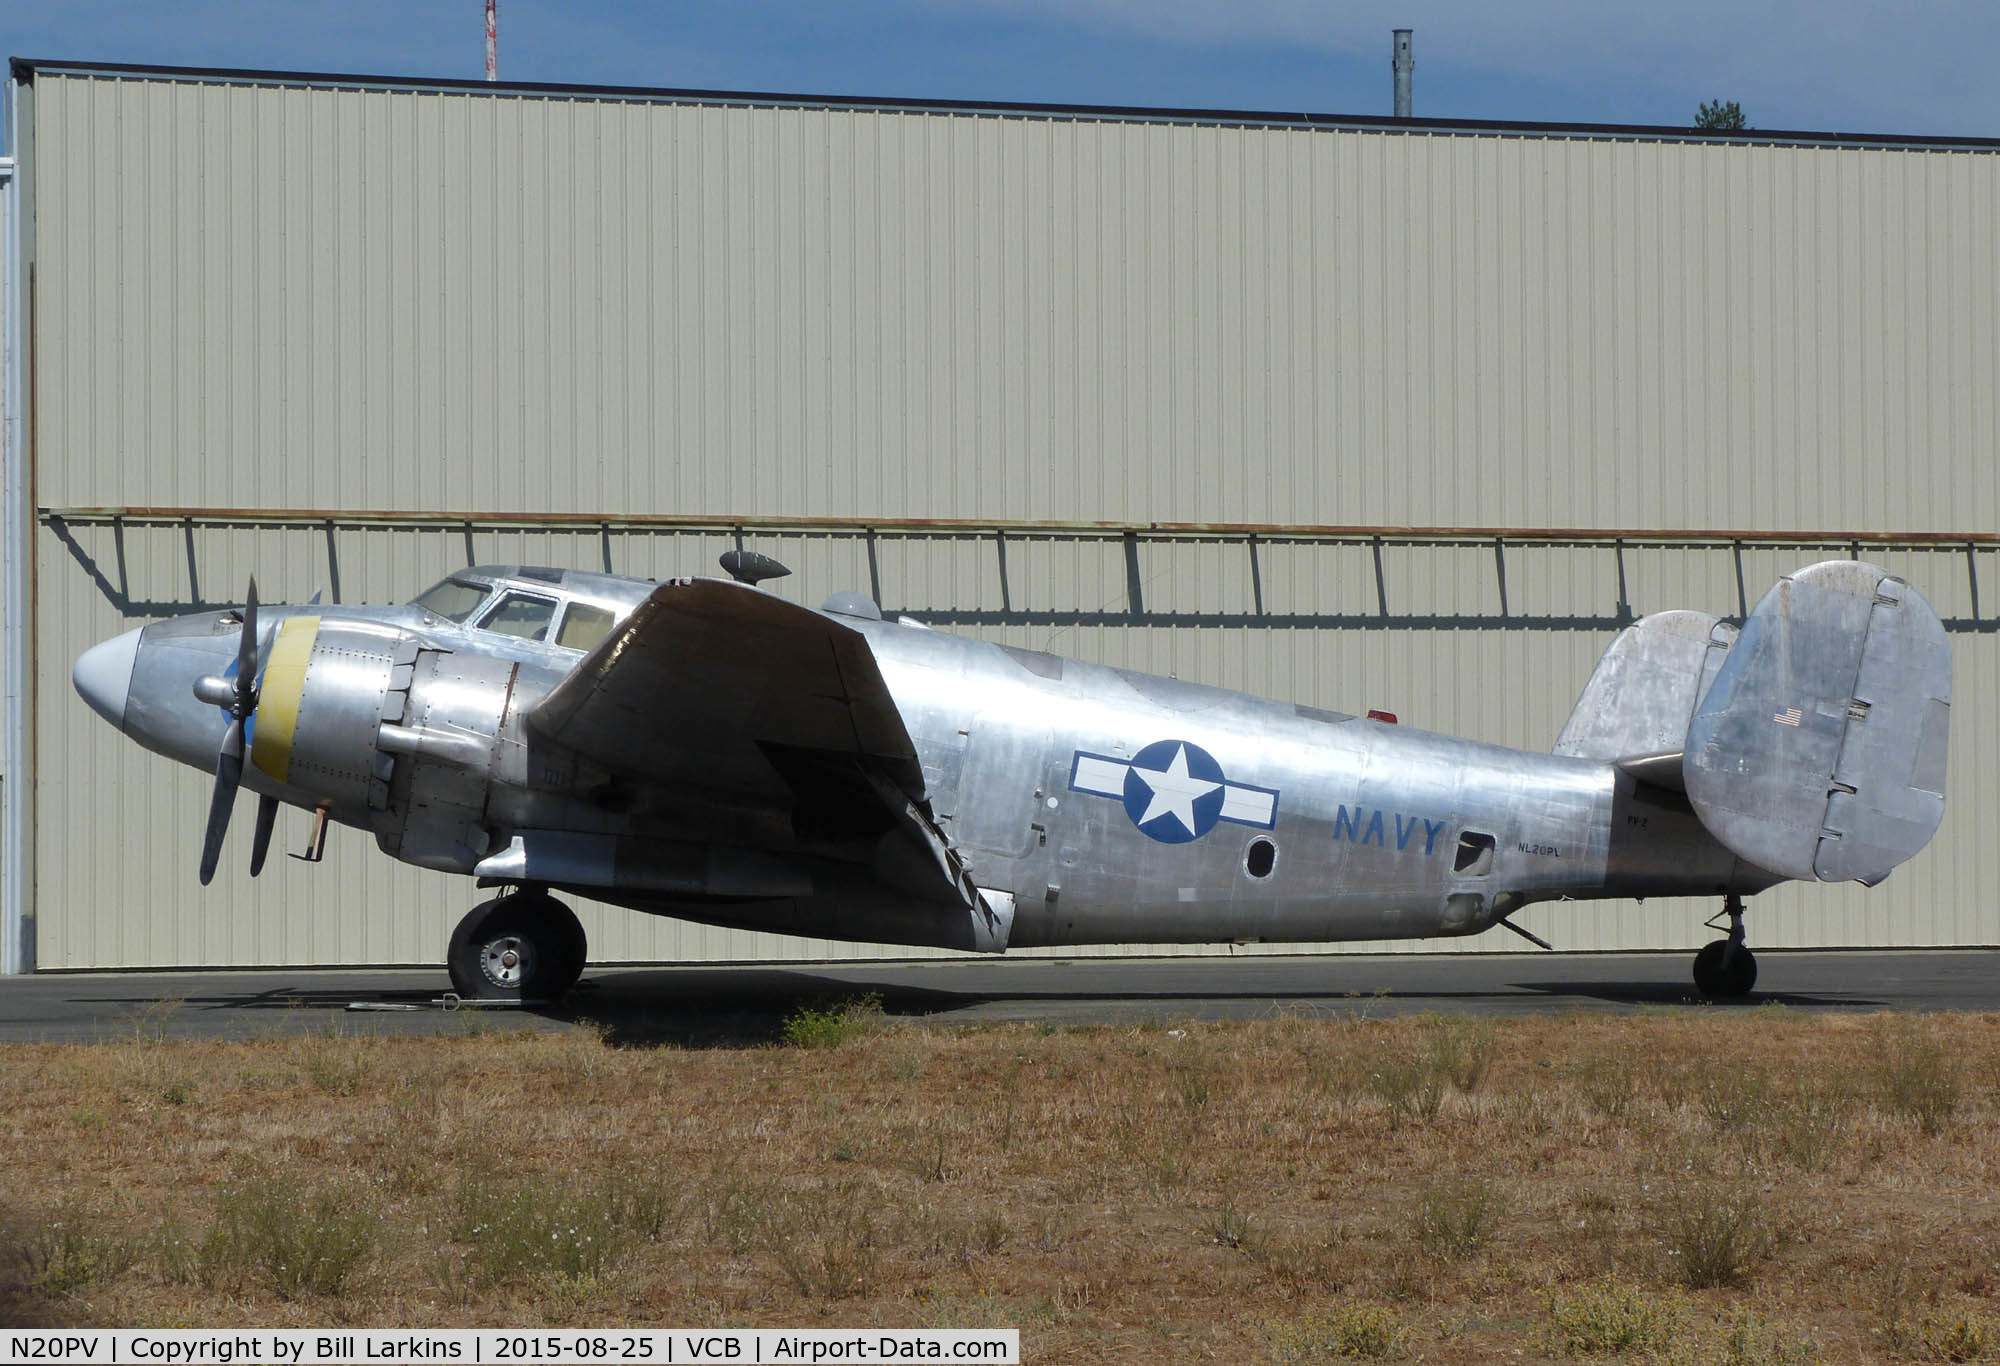 N20PV, 1944 Lockheed PV-2 Harpoon C/N 15-1490, Appears to be ready to fly again.